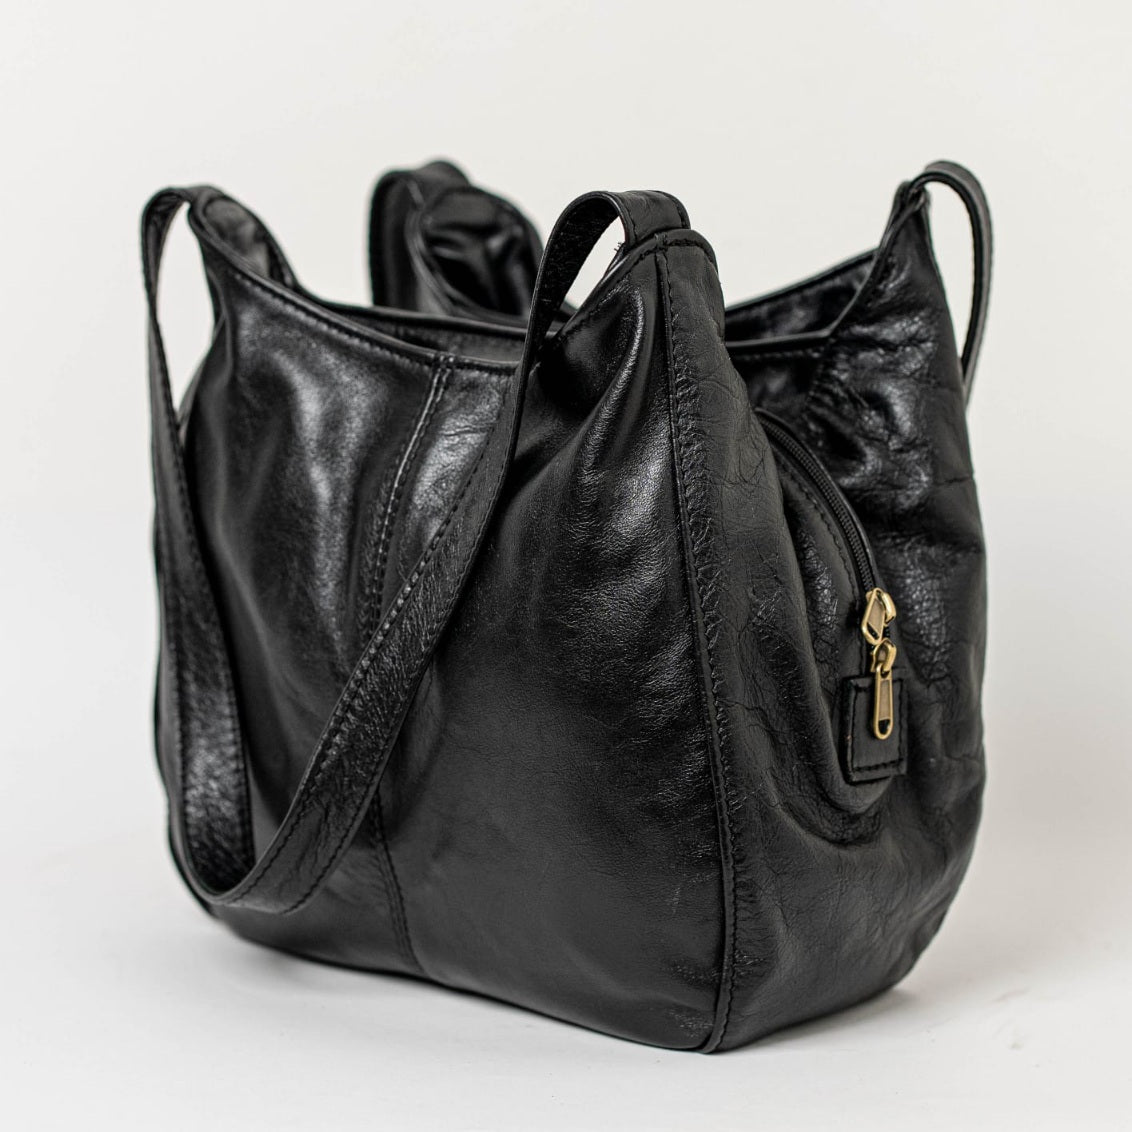 Corra leather bags